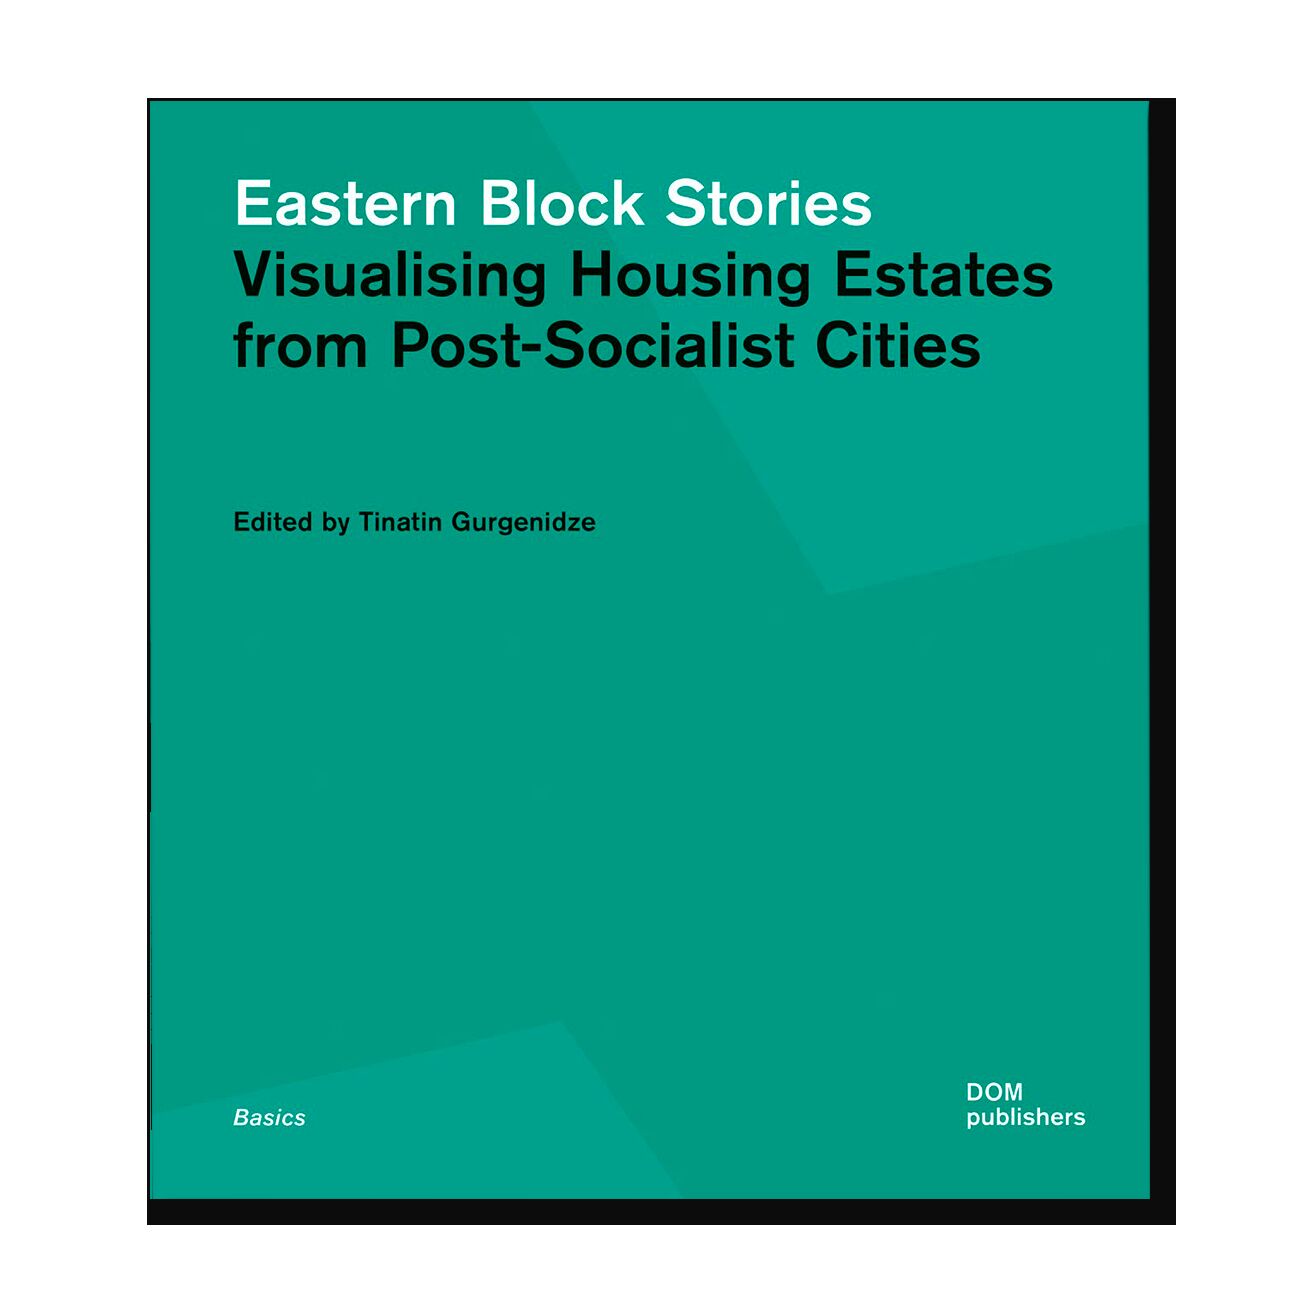 Eastern Block Stories: Visualising Housing Estates from Post-Socialist Cities